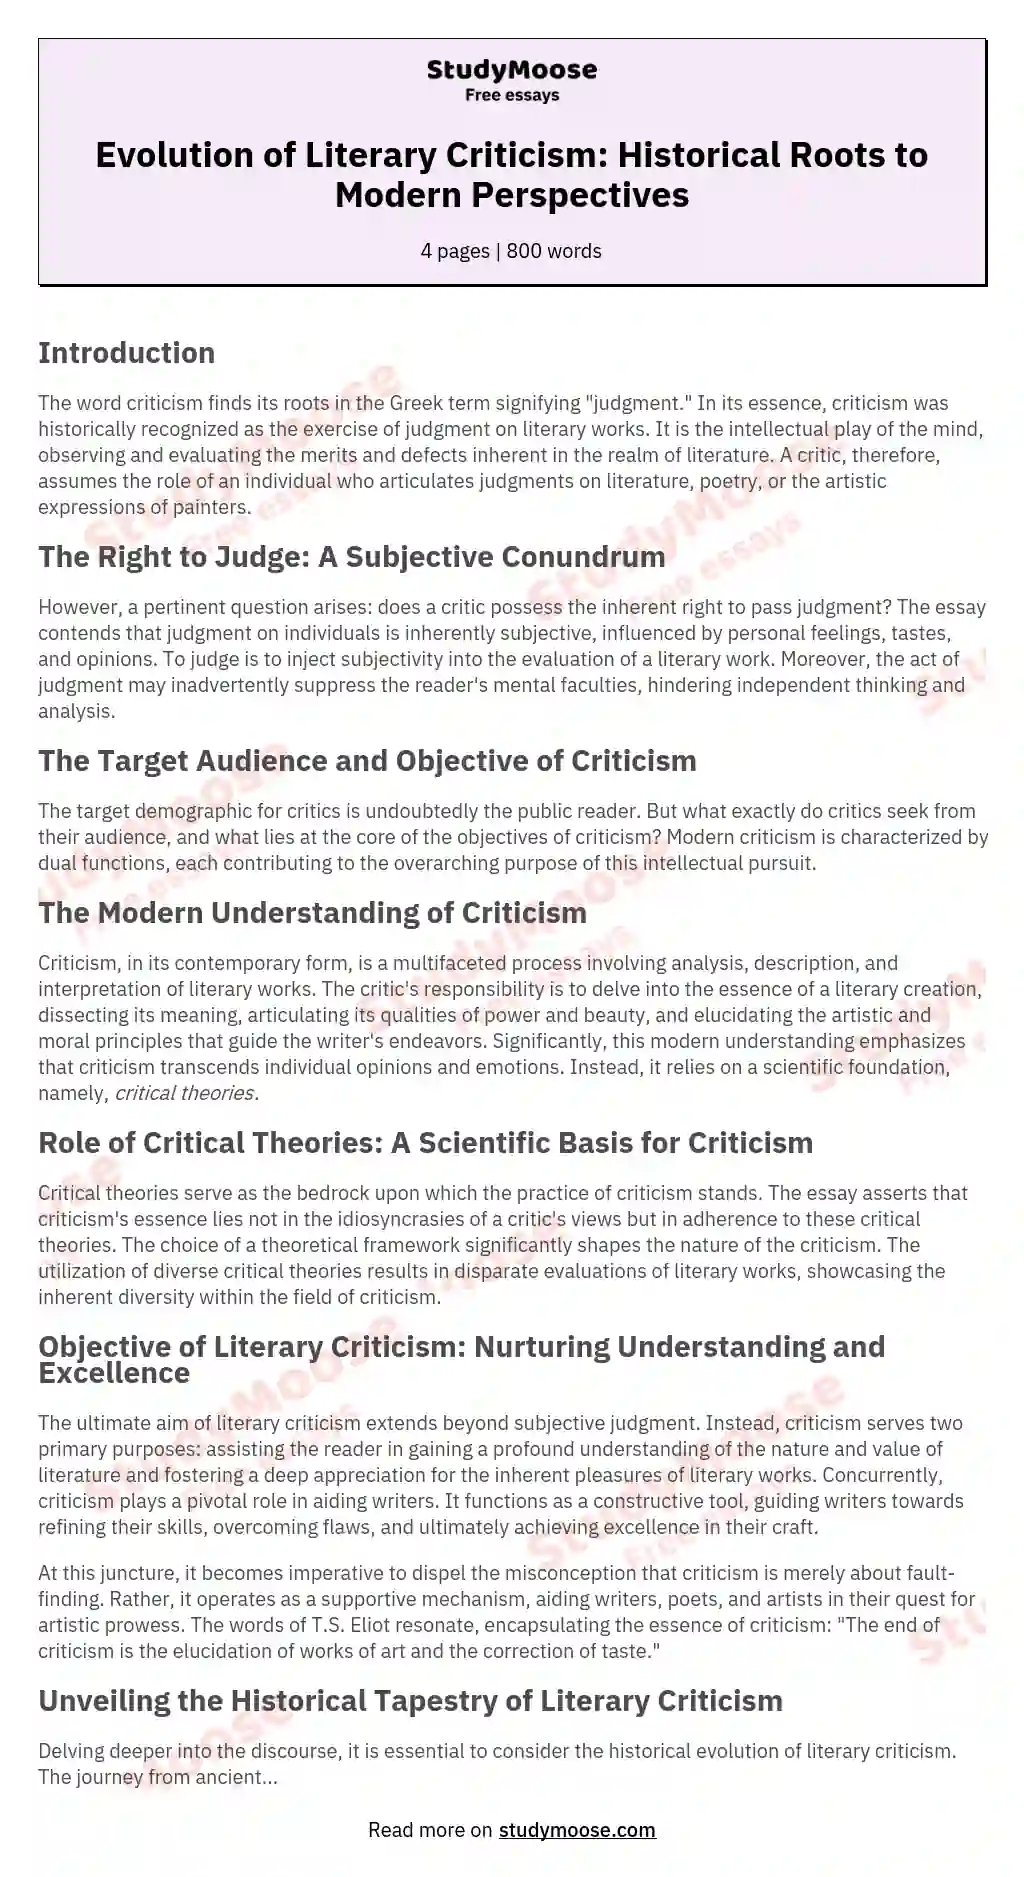 Evolution of Literary Criticism: Historical Roots to Modern Perspectives essay